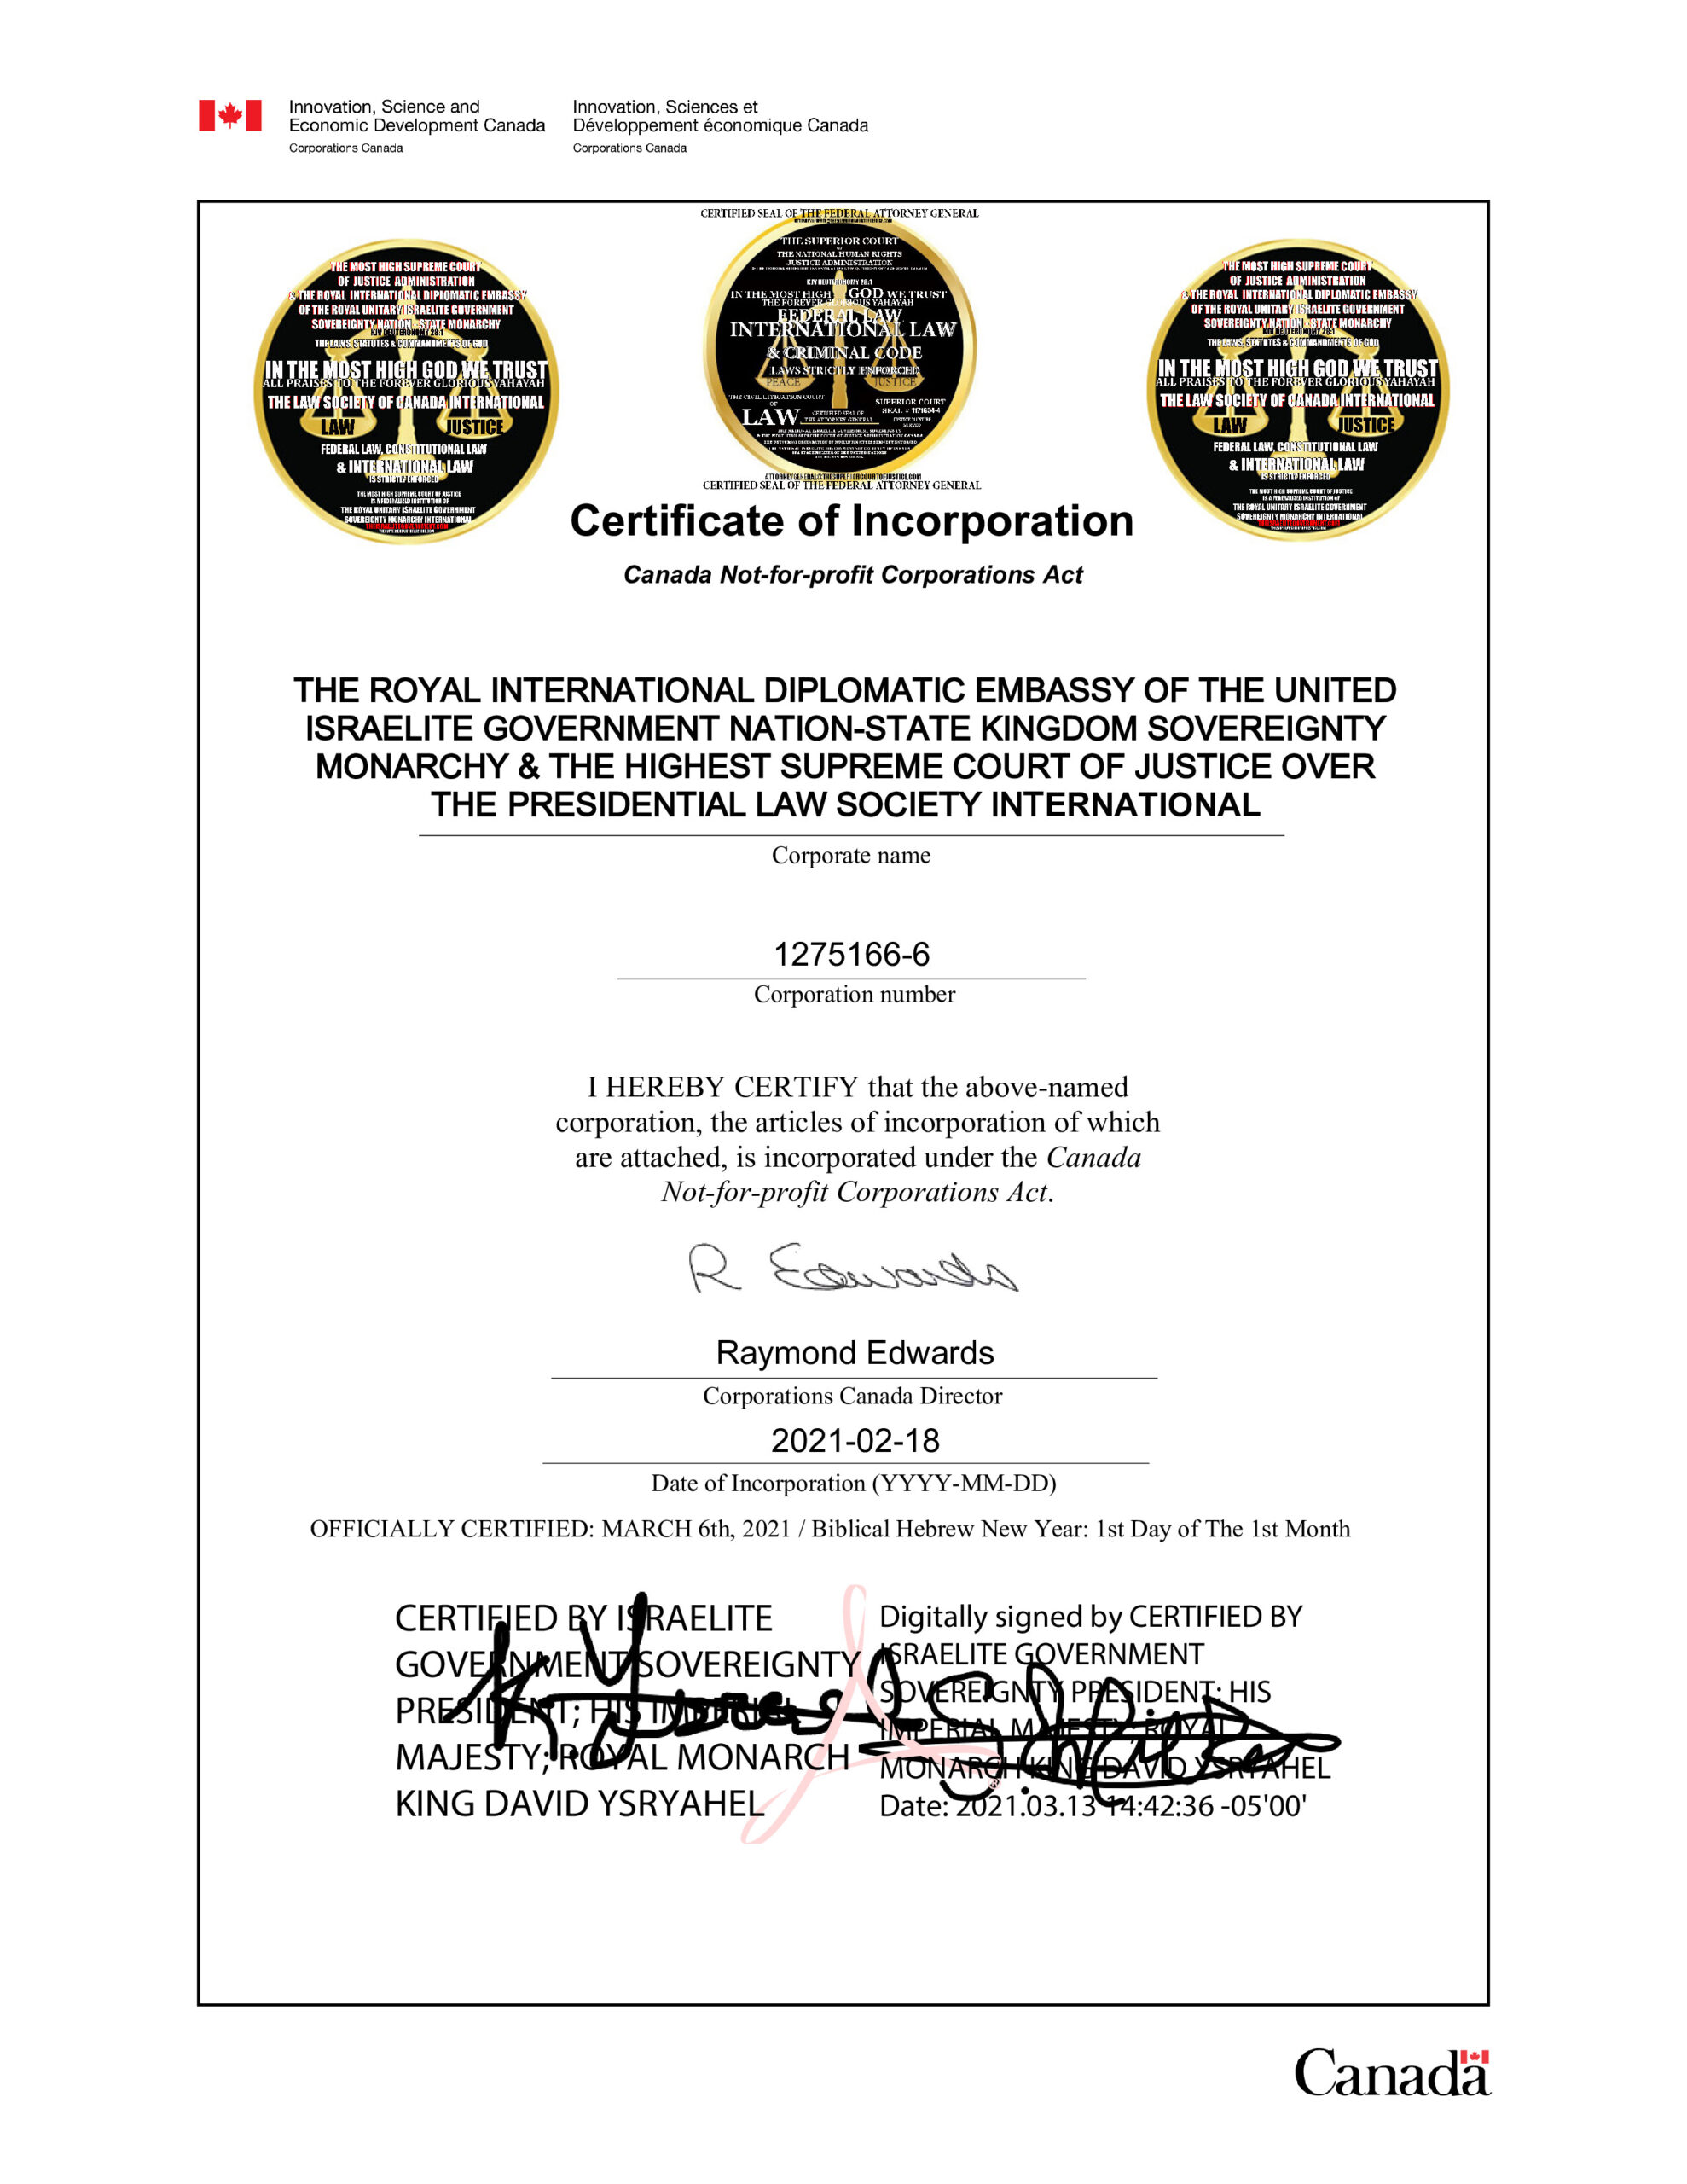 CERTIFIED-THE-ROYAL-INTERNATIONAL-DIPLOMATIC-EMBASSY-OF-THE-UNITED-ISRAELITE-GOVERNMENT-NATION-STATE-KINGDOM-MONARCHY-Incorporation-Constitution-MAR-2021